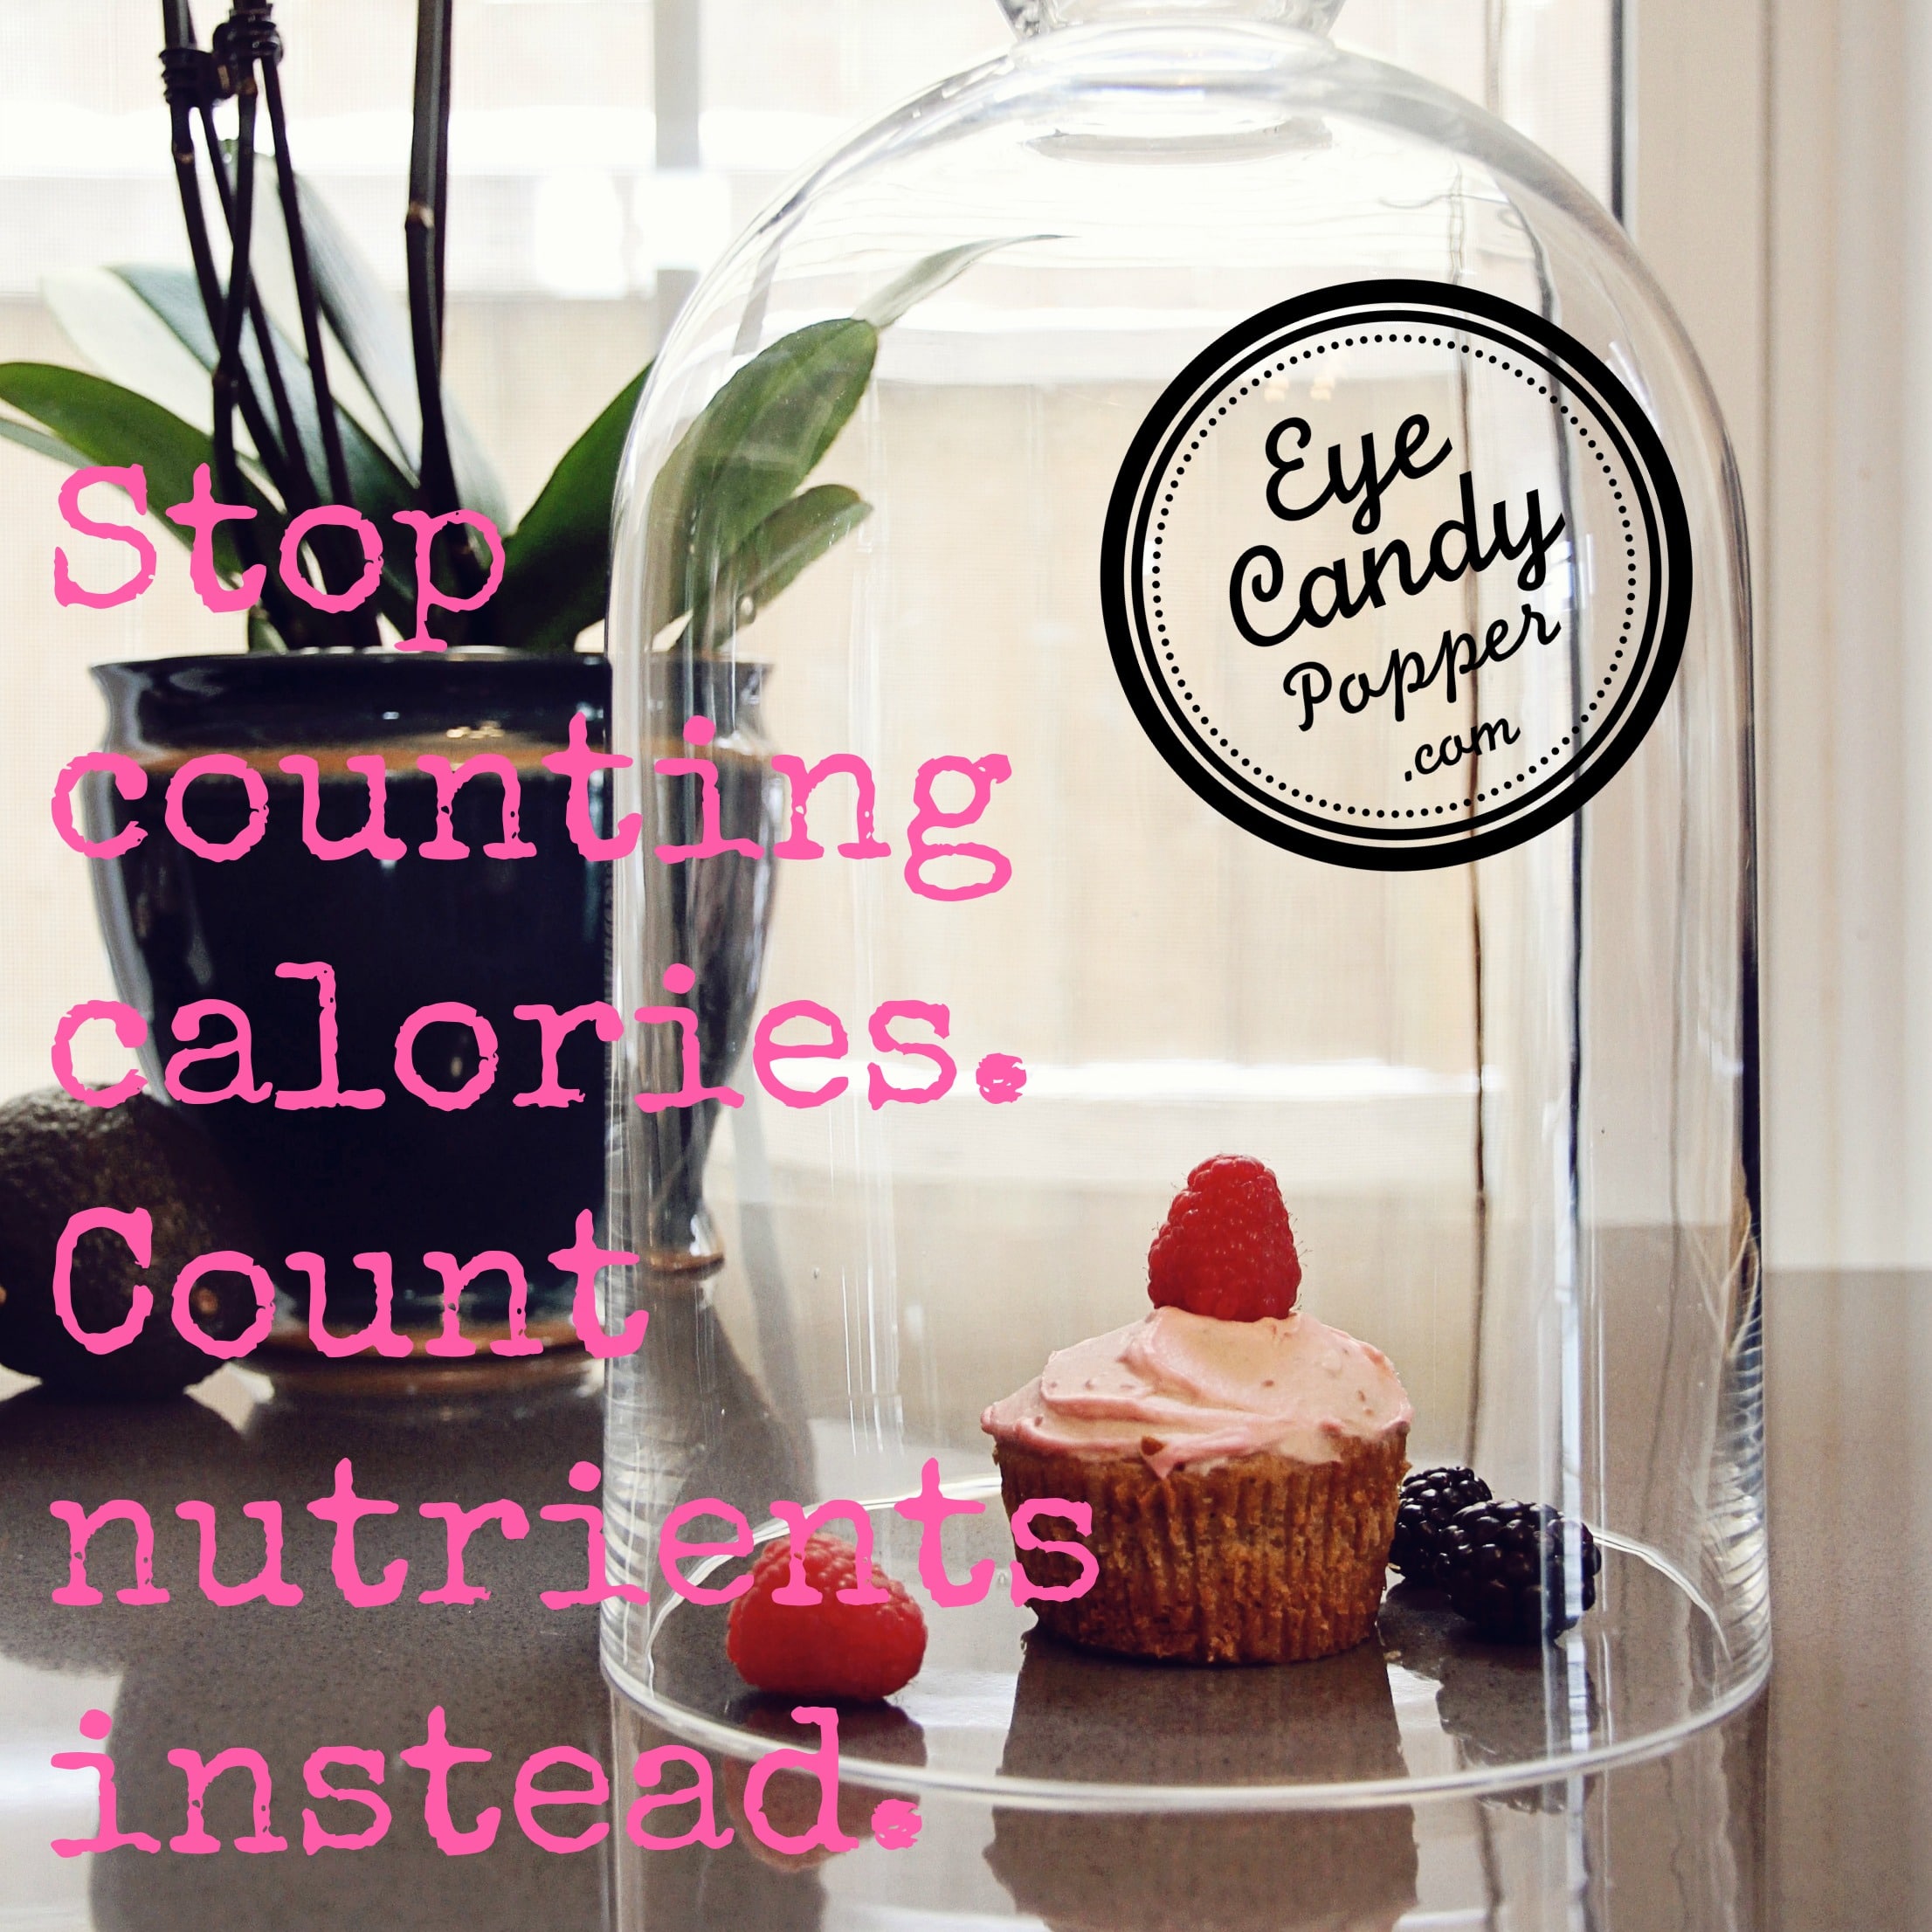 stop counting calories - www.eyecandypopper.com